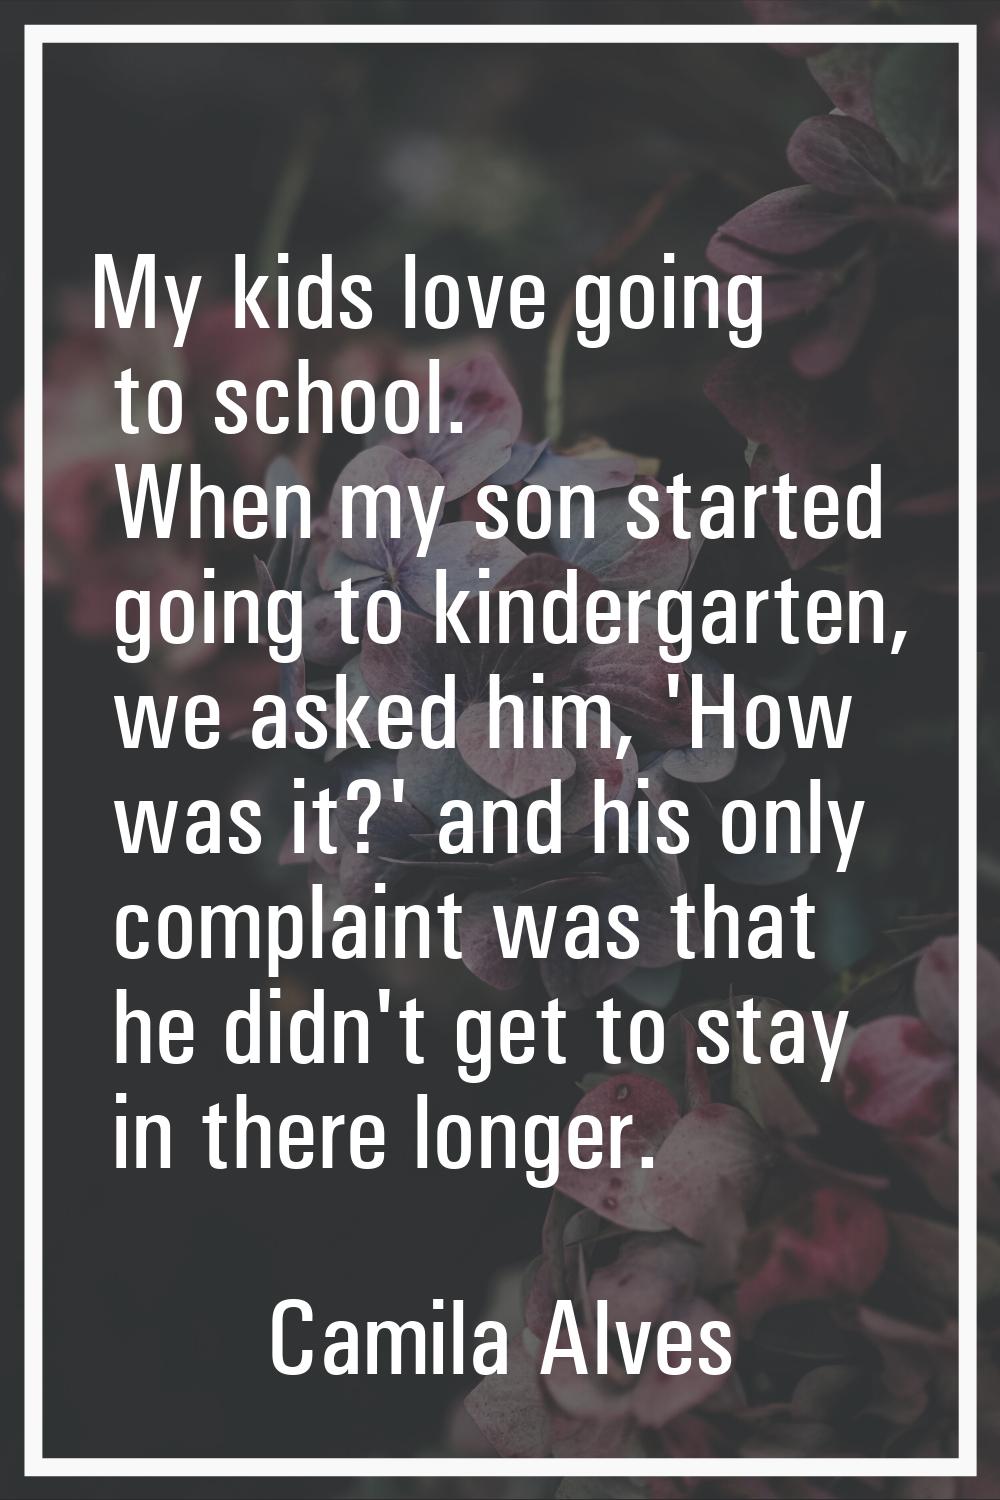 My kids love going to school. When my son started going to kindergarten, we asked him, 'How was it?